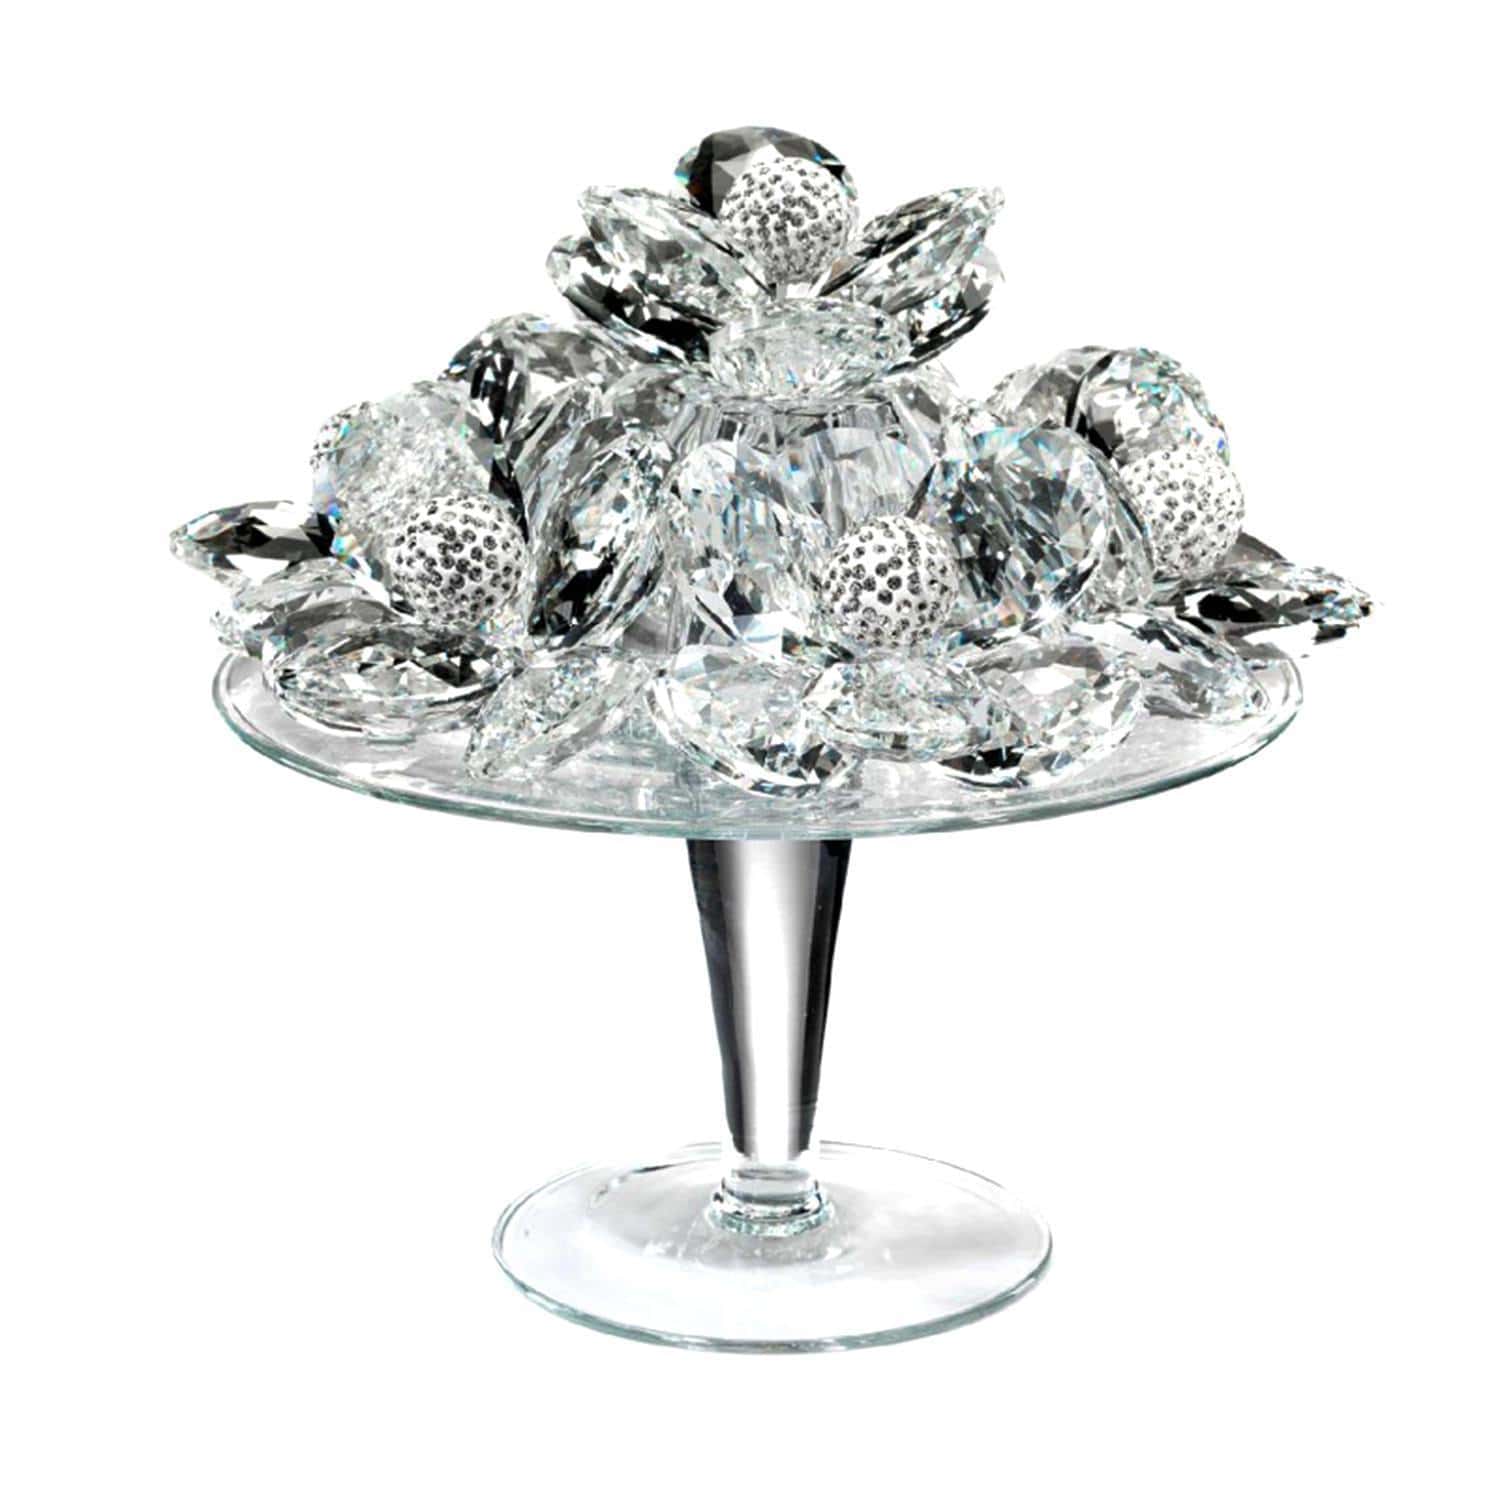 Debora Carlucci Glass Riser with Crystal Flower and Strass Spheres - DC5504 - Jashanmal Home